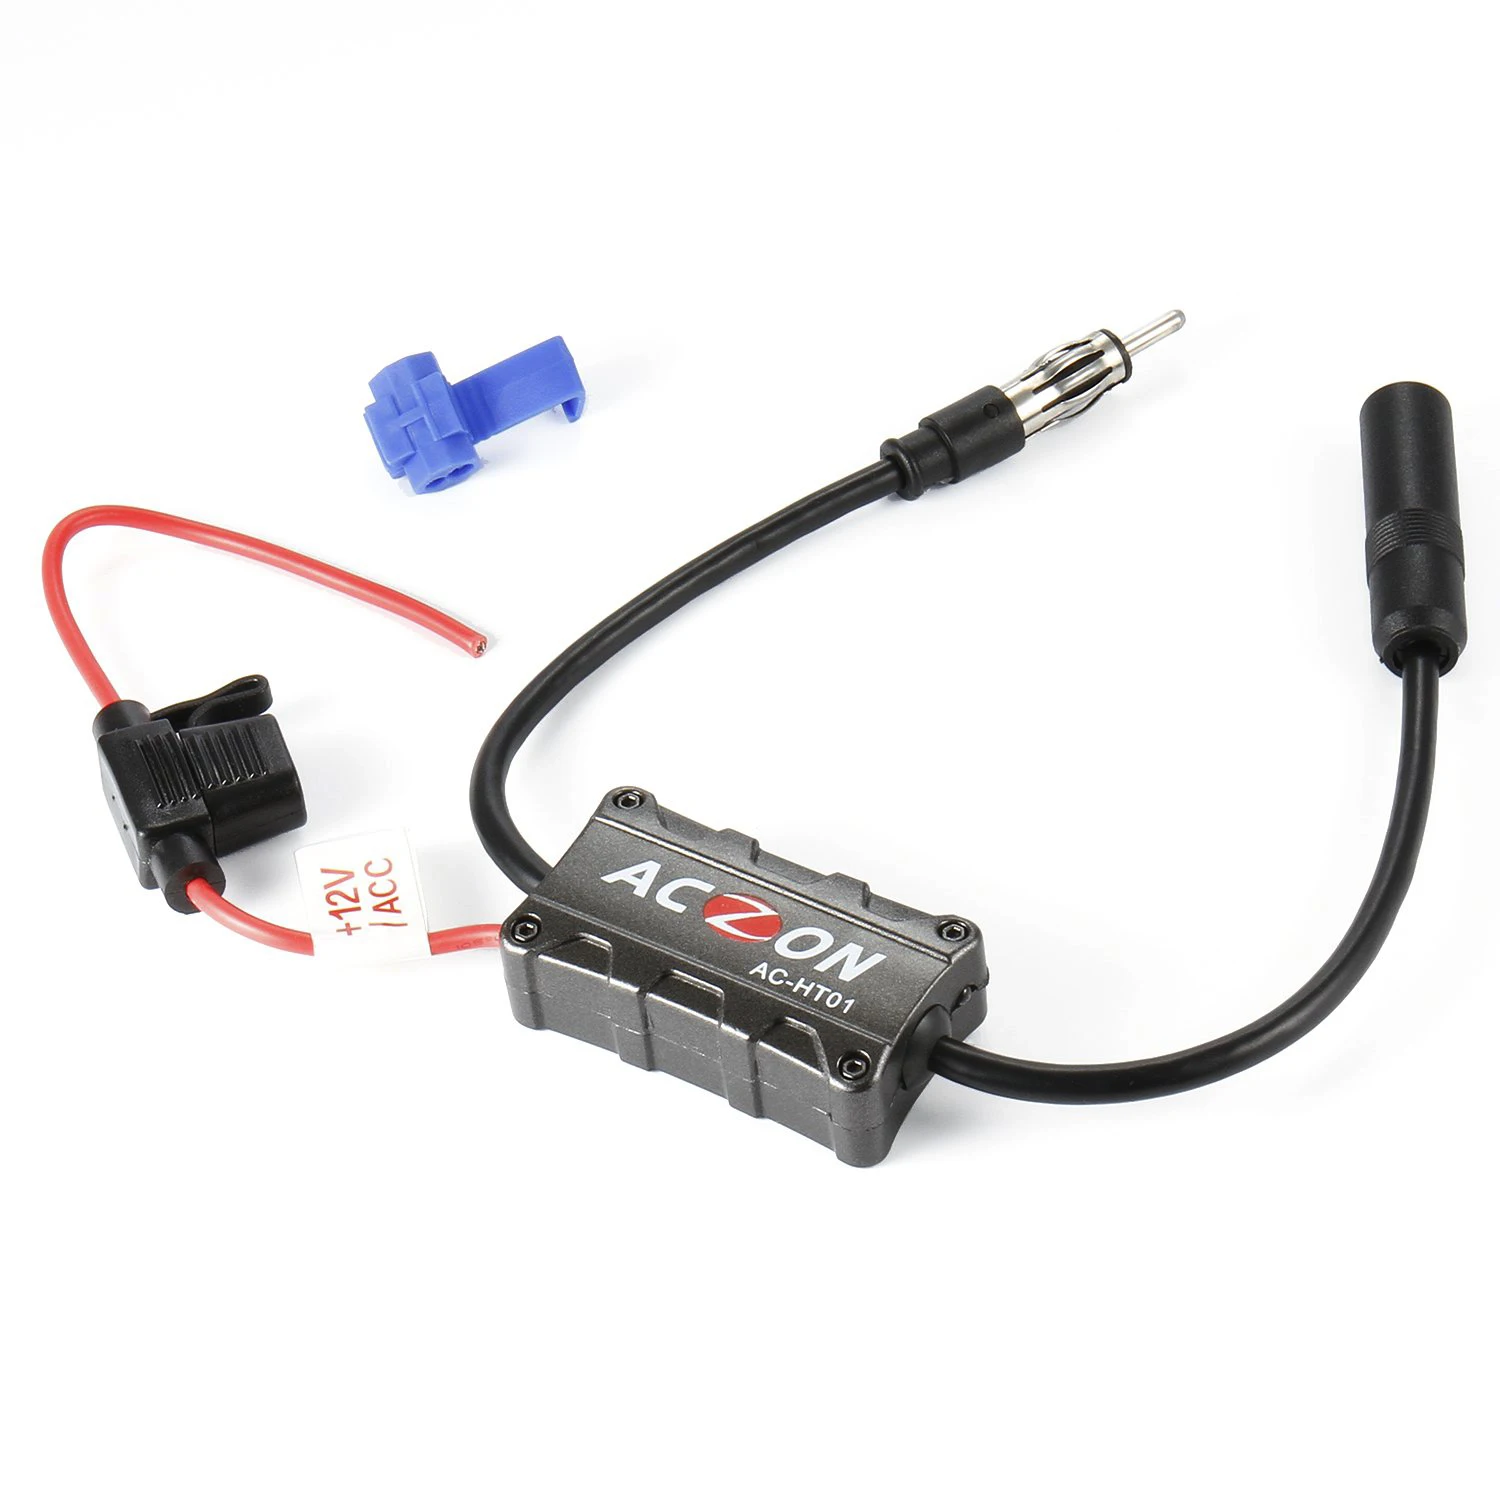 

Auto Car Radio Vehicles DC 12V FM Antenna Signal Amplifier Booster For Both AM And FM Radio Stations 48-860 MHZ